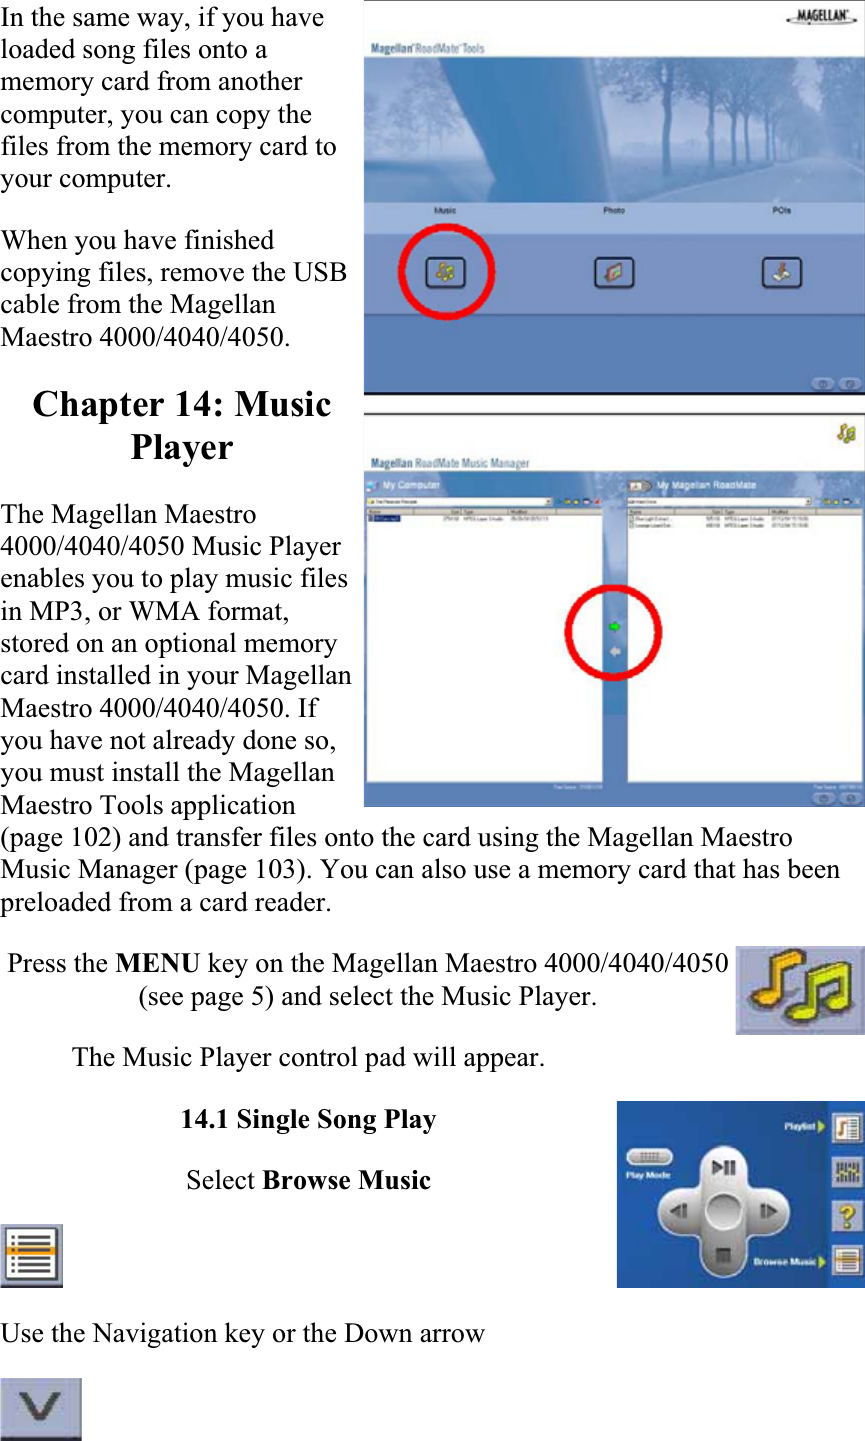 In the same way, if you have loaded song files onto a memory card from another computer, you can copy the files from the memory card to your computer.  When you have finished copying files, remove the USB cable from the Magellan Maestro 4000/4040/4050.  Chapter 14: Music PlayerThe Magellan Maestro 4000/4040/4050 Music Player enables you to play music files in MP3, or WMA format, stored on an optional memory card installed in your Magellan Maestro 4000/4040/4050. If you have not already done so, you must install the Magellan Maestro Tools application (page 102) and transfer files onto the card using the Magellan Maestro Music Manager (page 103). You can also use a memory card that has been preloaded from a card reader.  Press the MENU key on the Magellan Maestro 4000/4040/4050 (see page 5) and select the Music Player.  The Music Player control pad will appear.14.1 Single Song Play Select Browse MusicUse the Navigation key or the Down arrow  